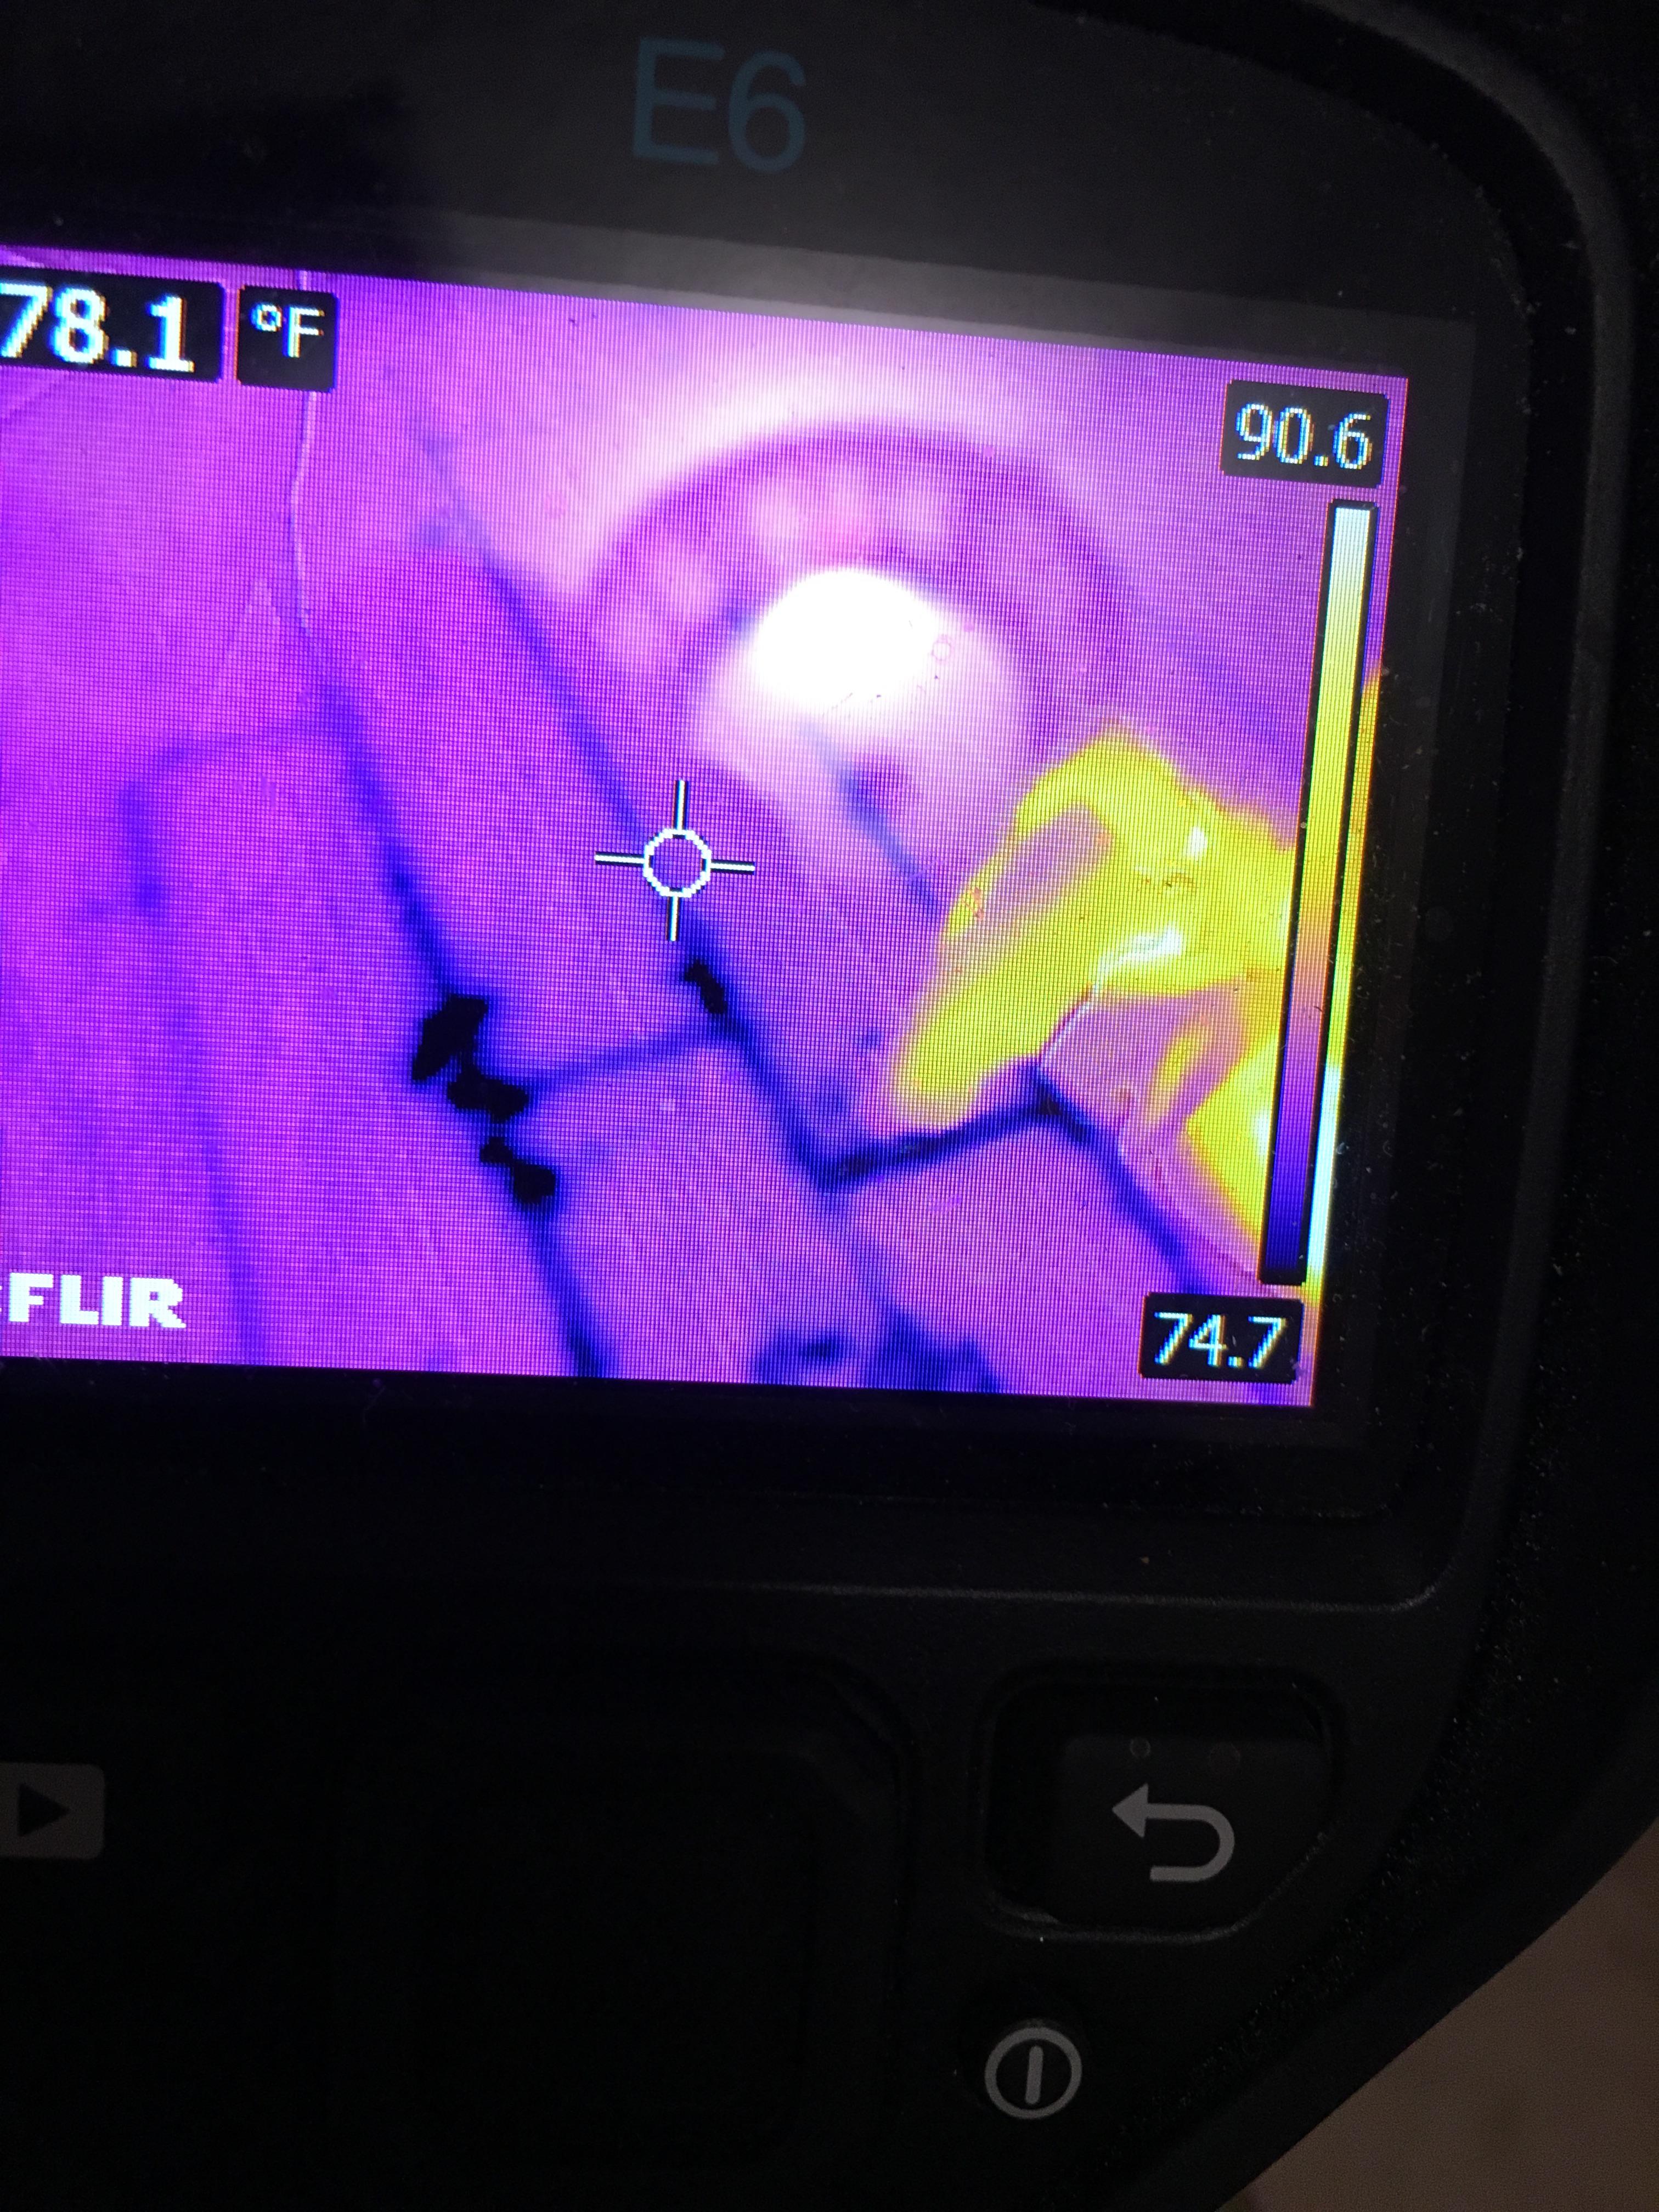 Using our thermal cameras to check for moisture.